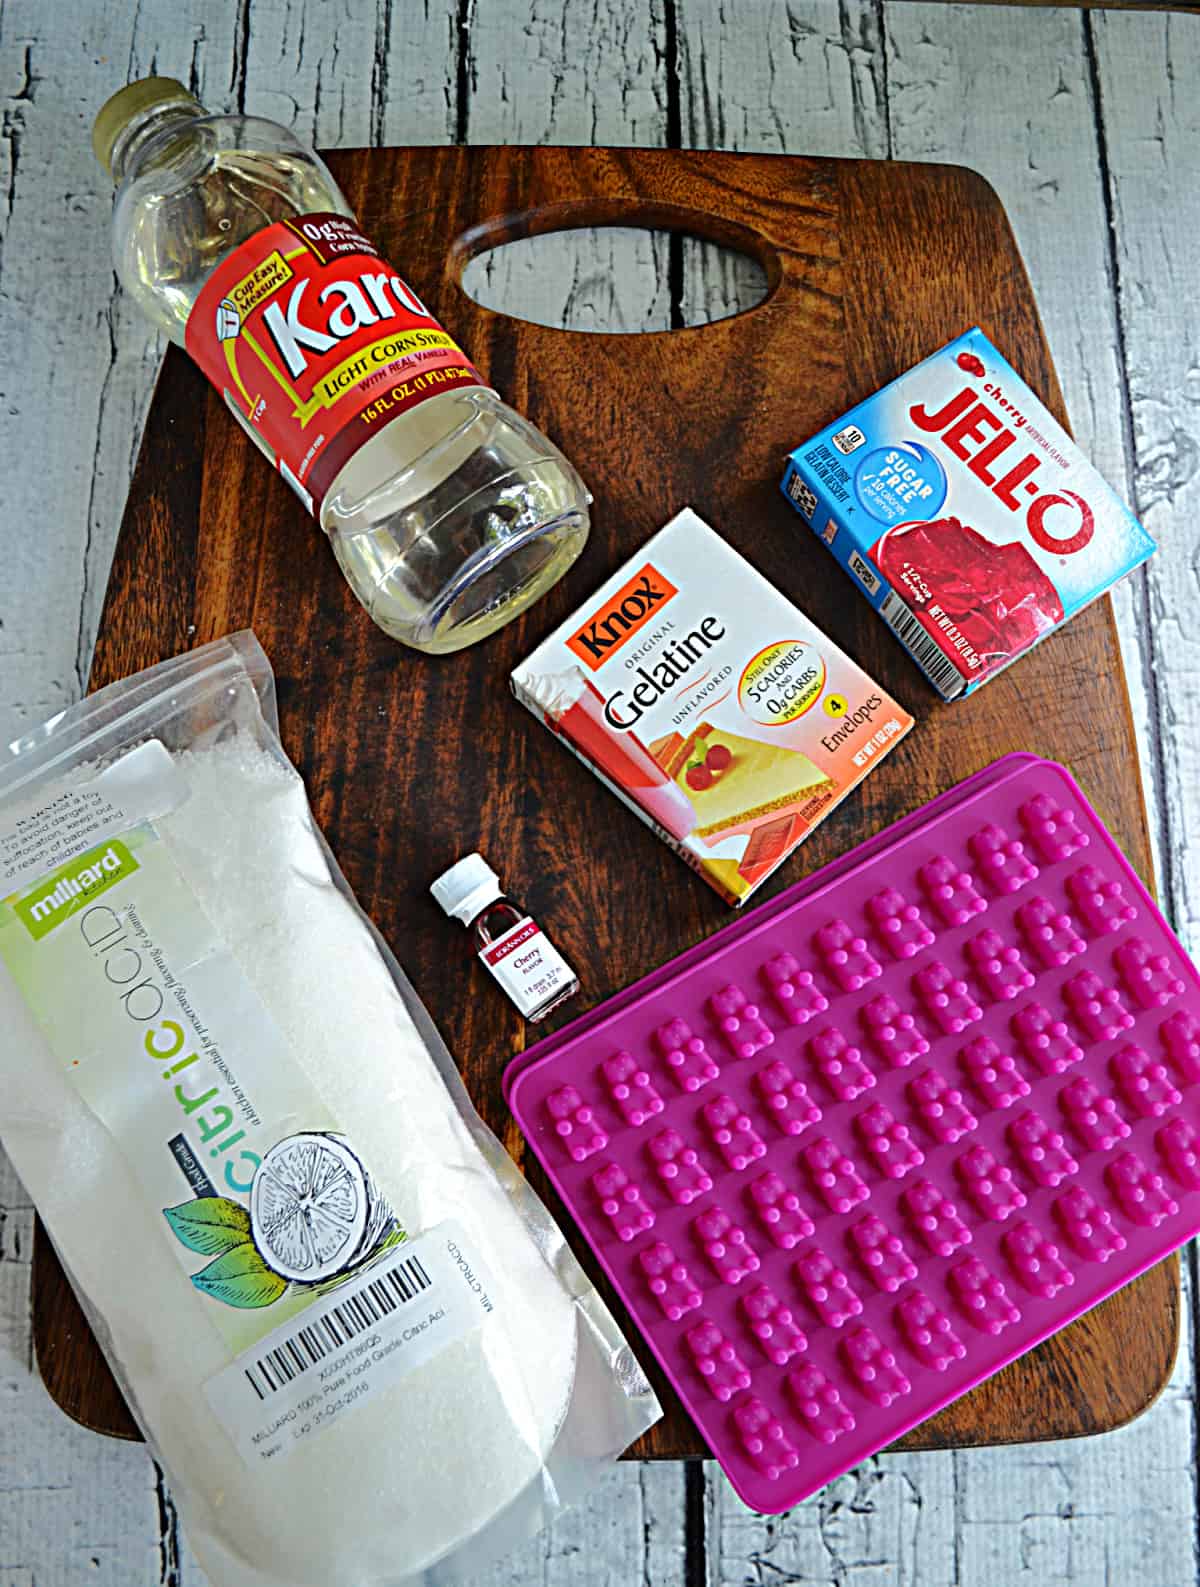 A cutting board with ingredients for making gummy bears.